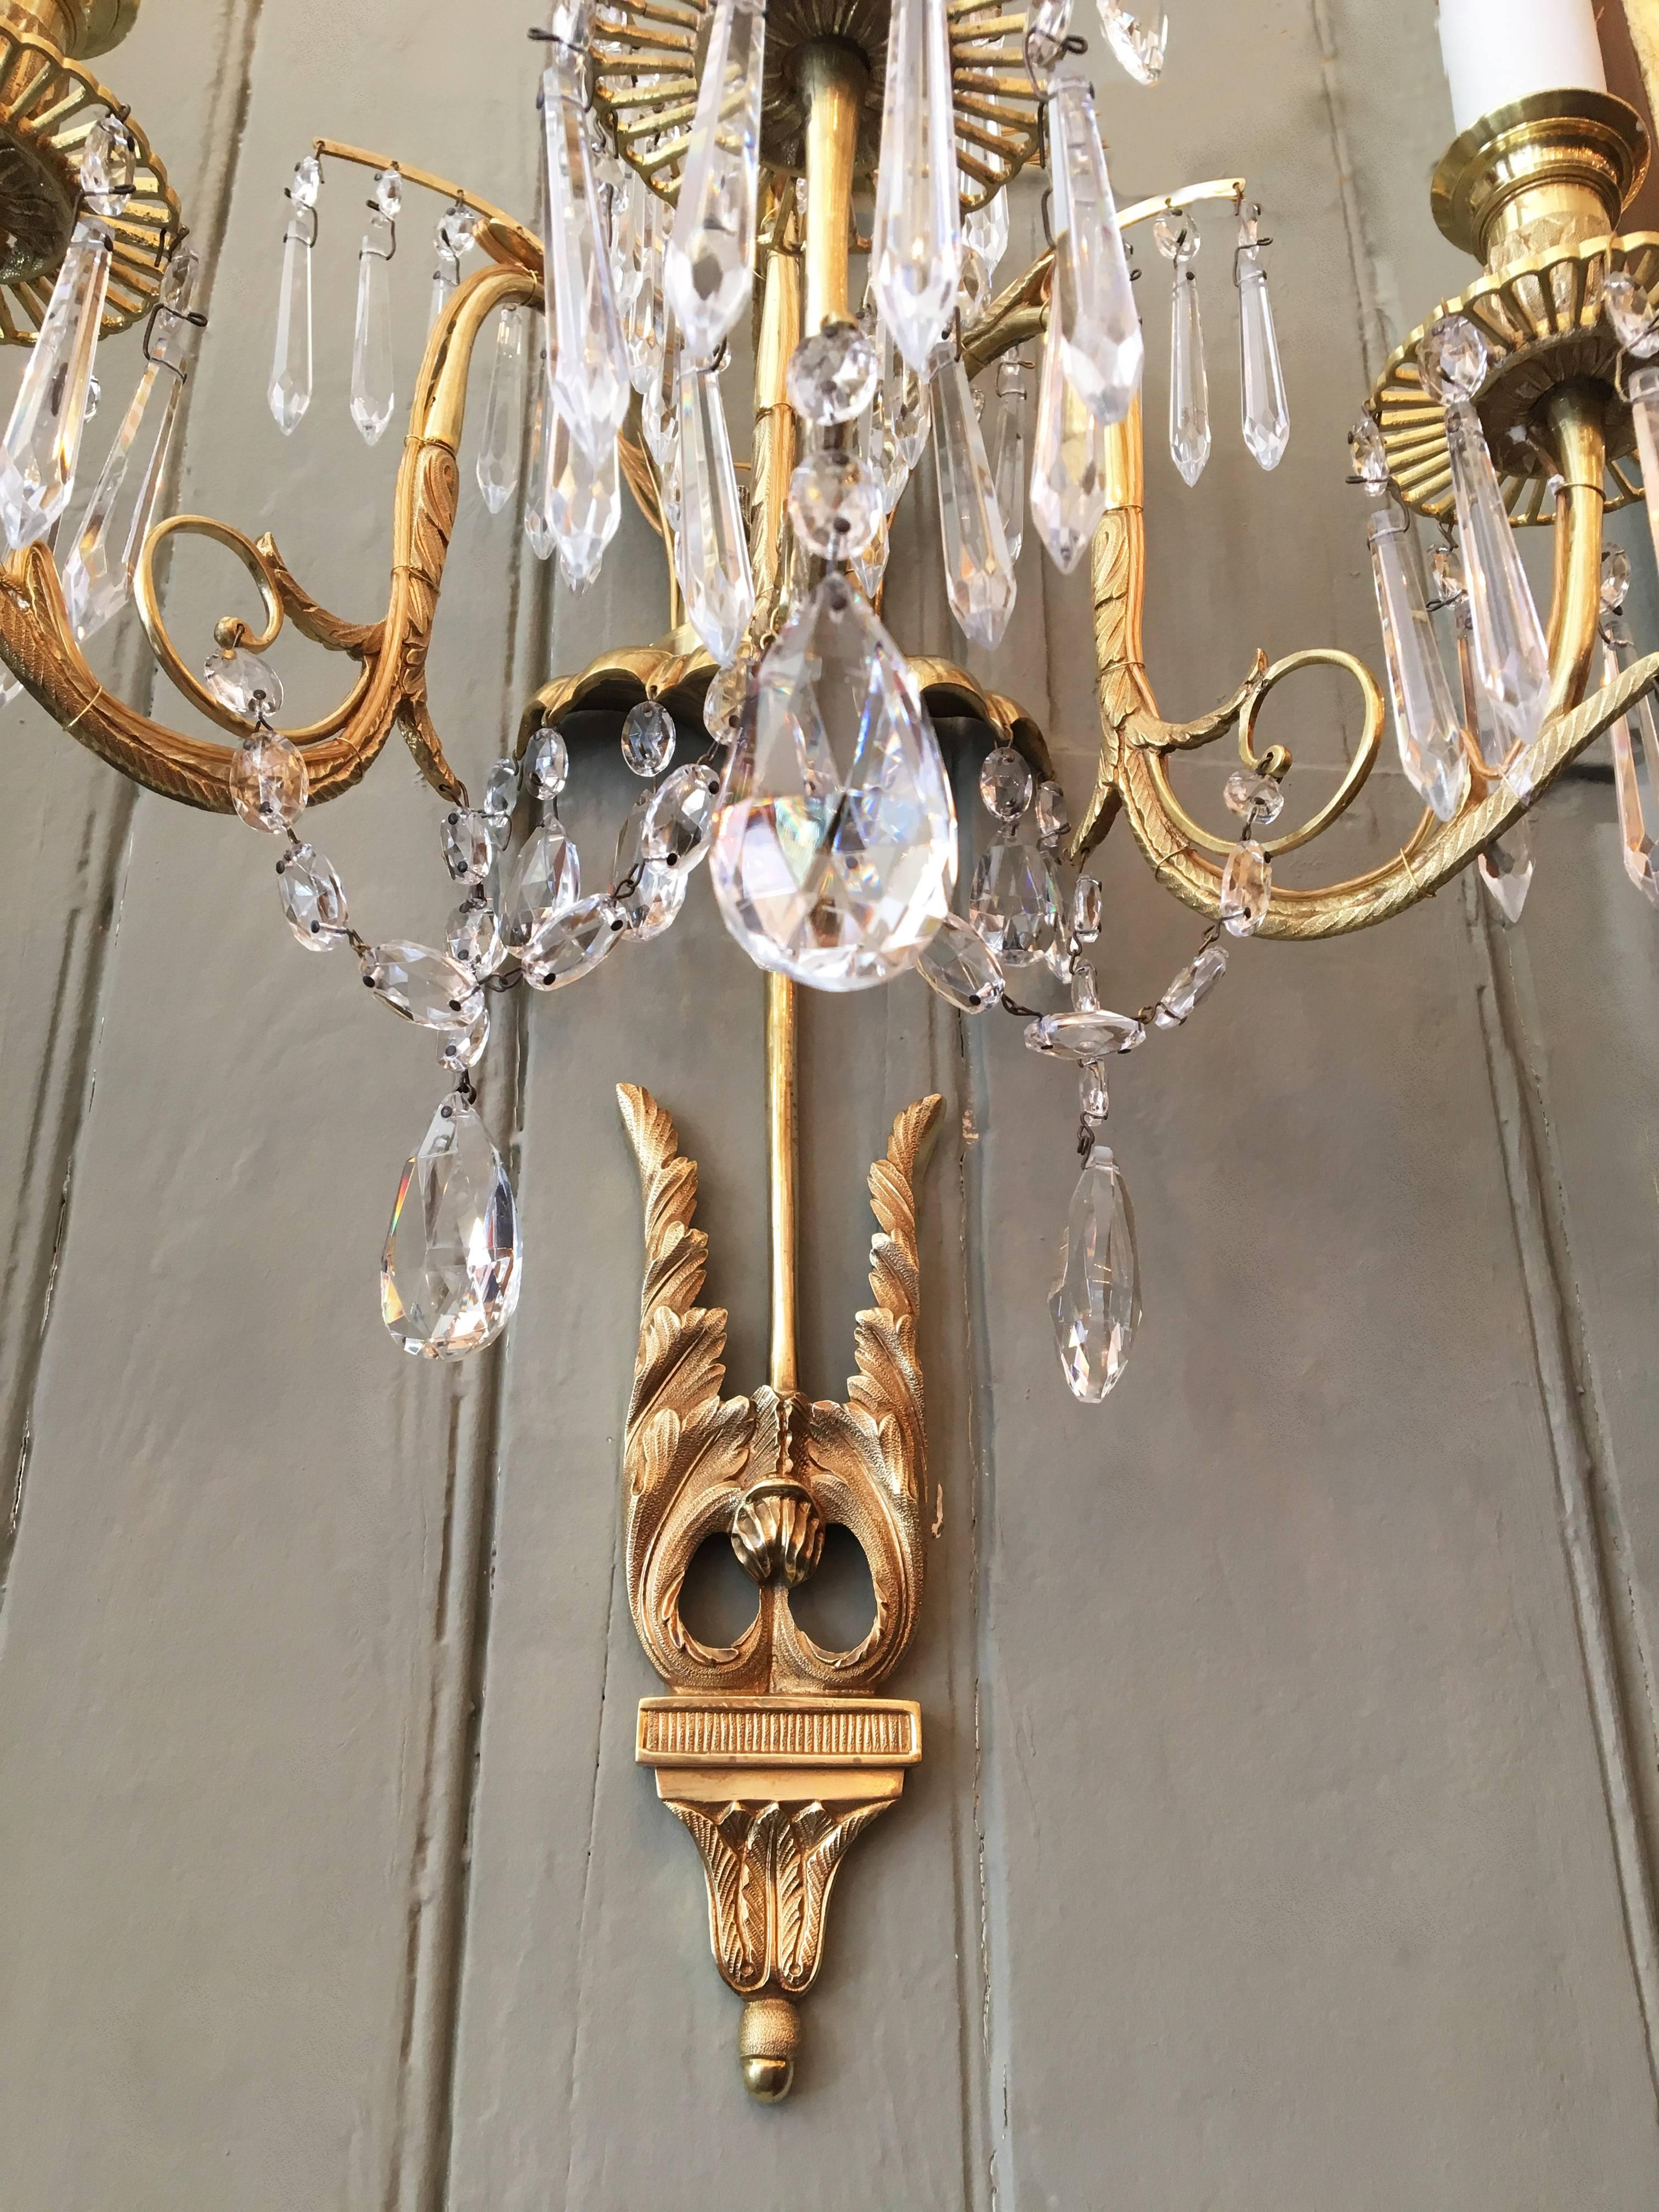 19th Century Russian Imperial Style Sconces 2